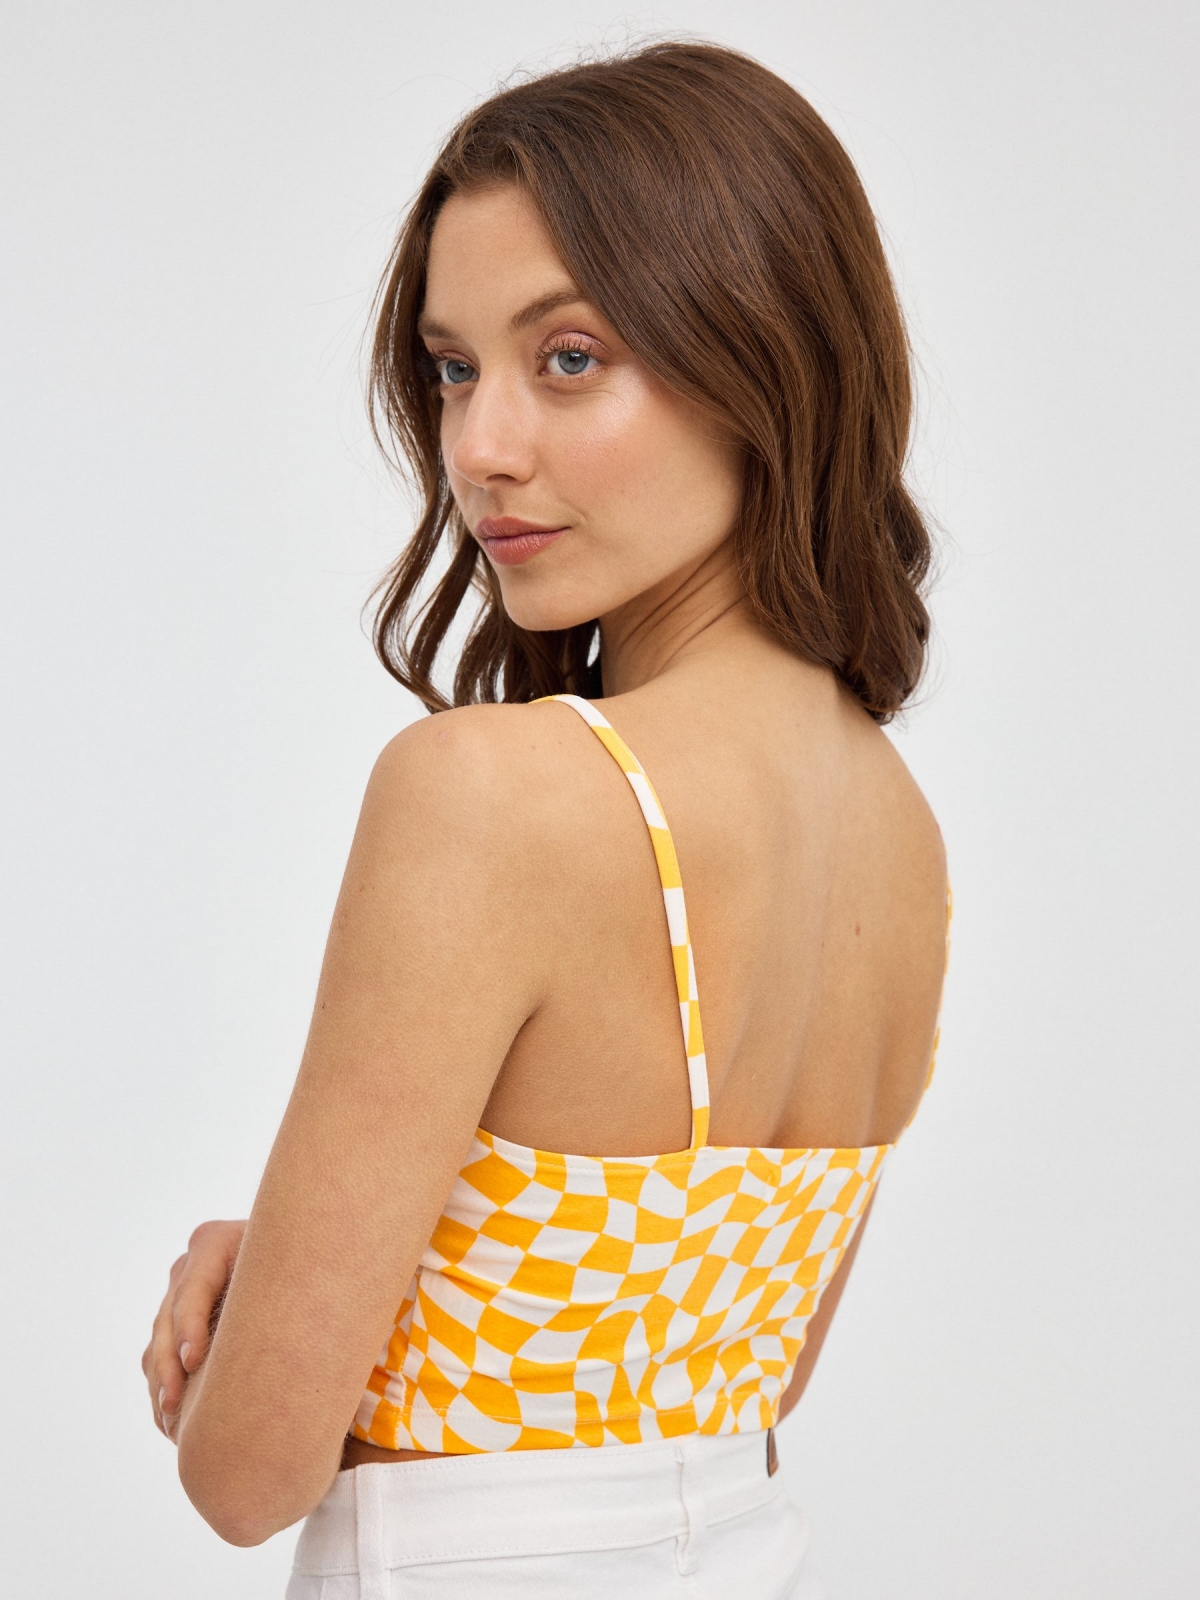 Crop top print plaid amber middle back view